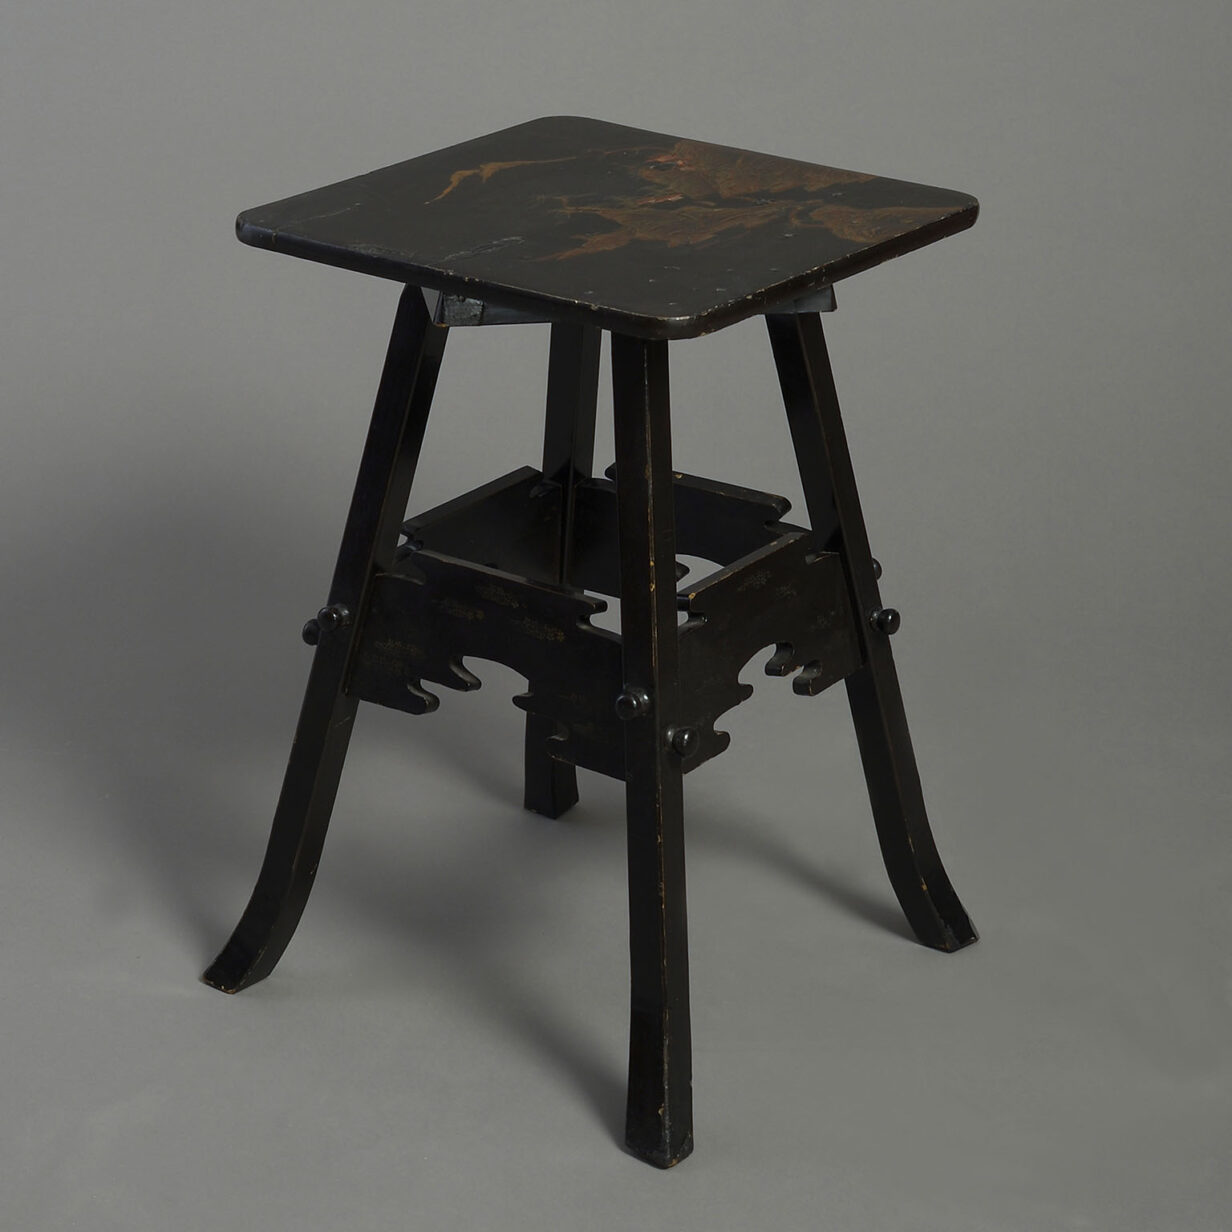 Japanese lacquer table